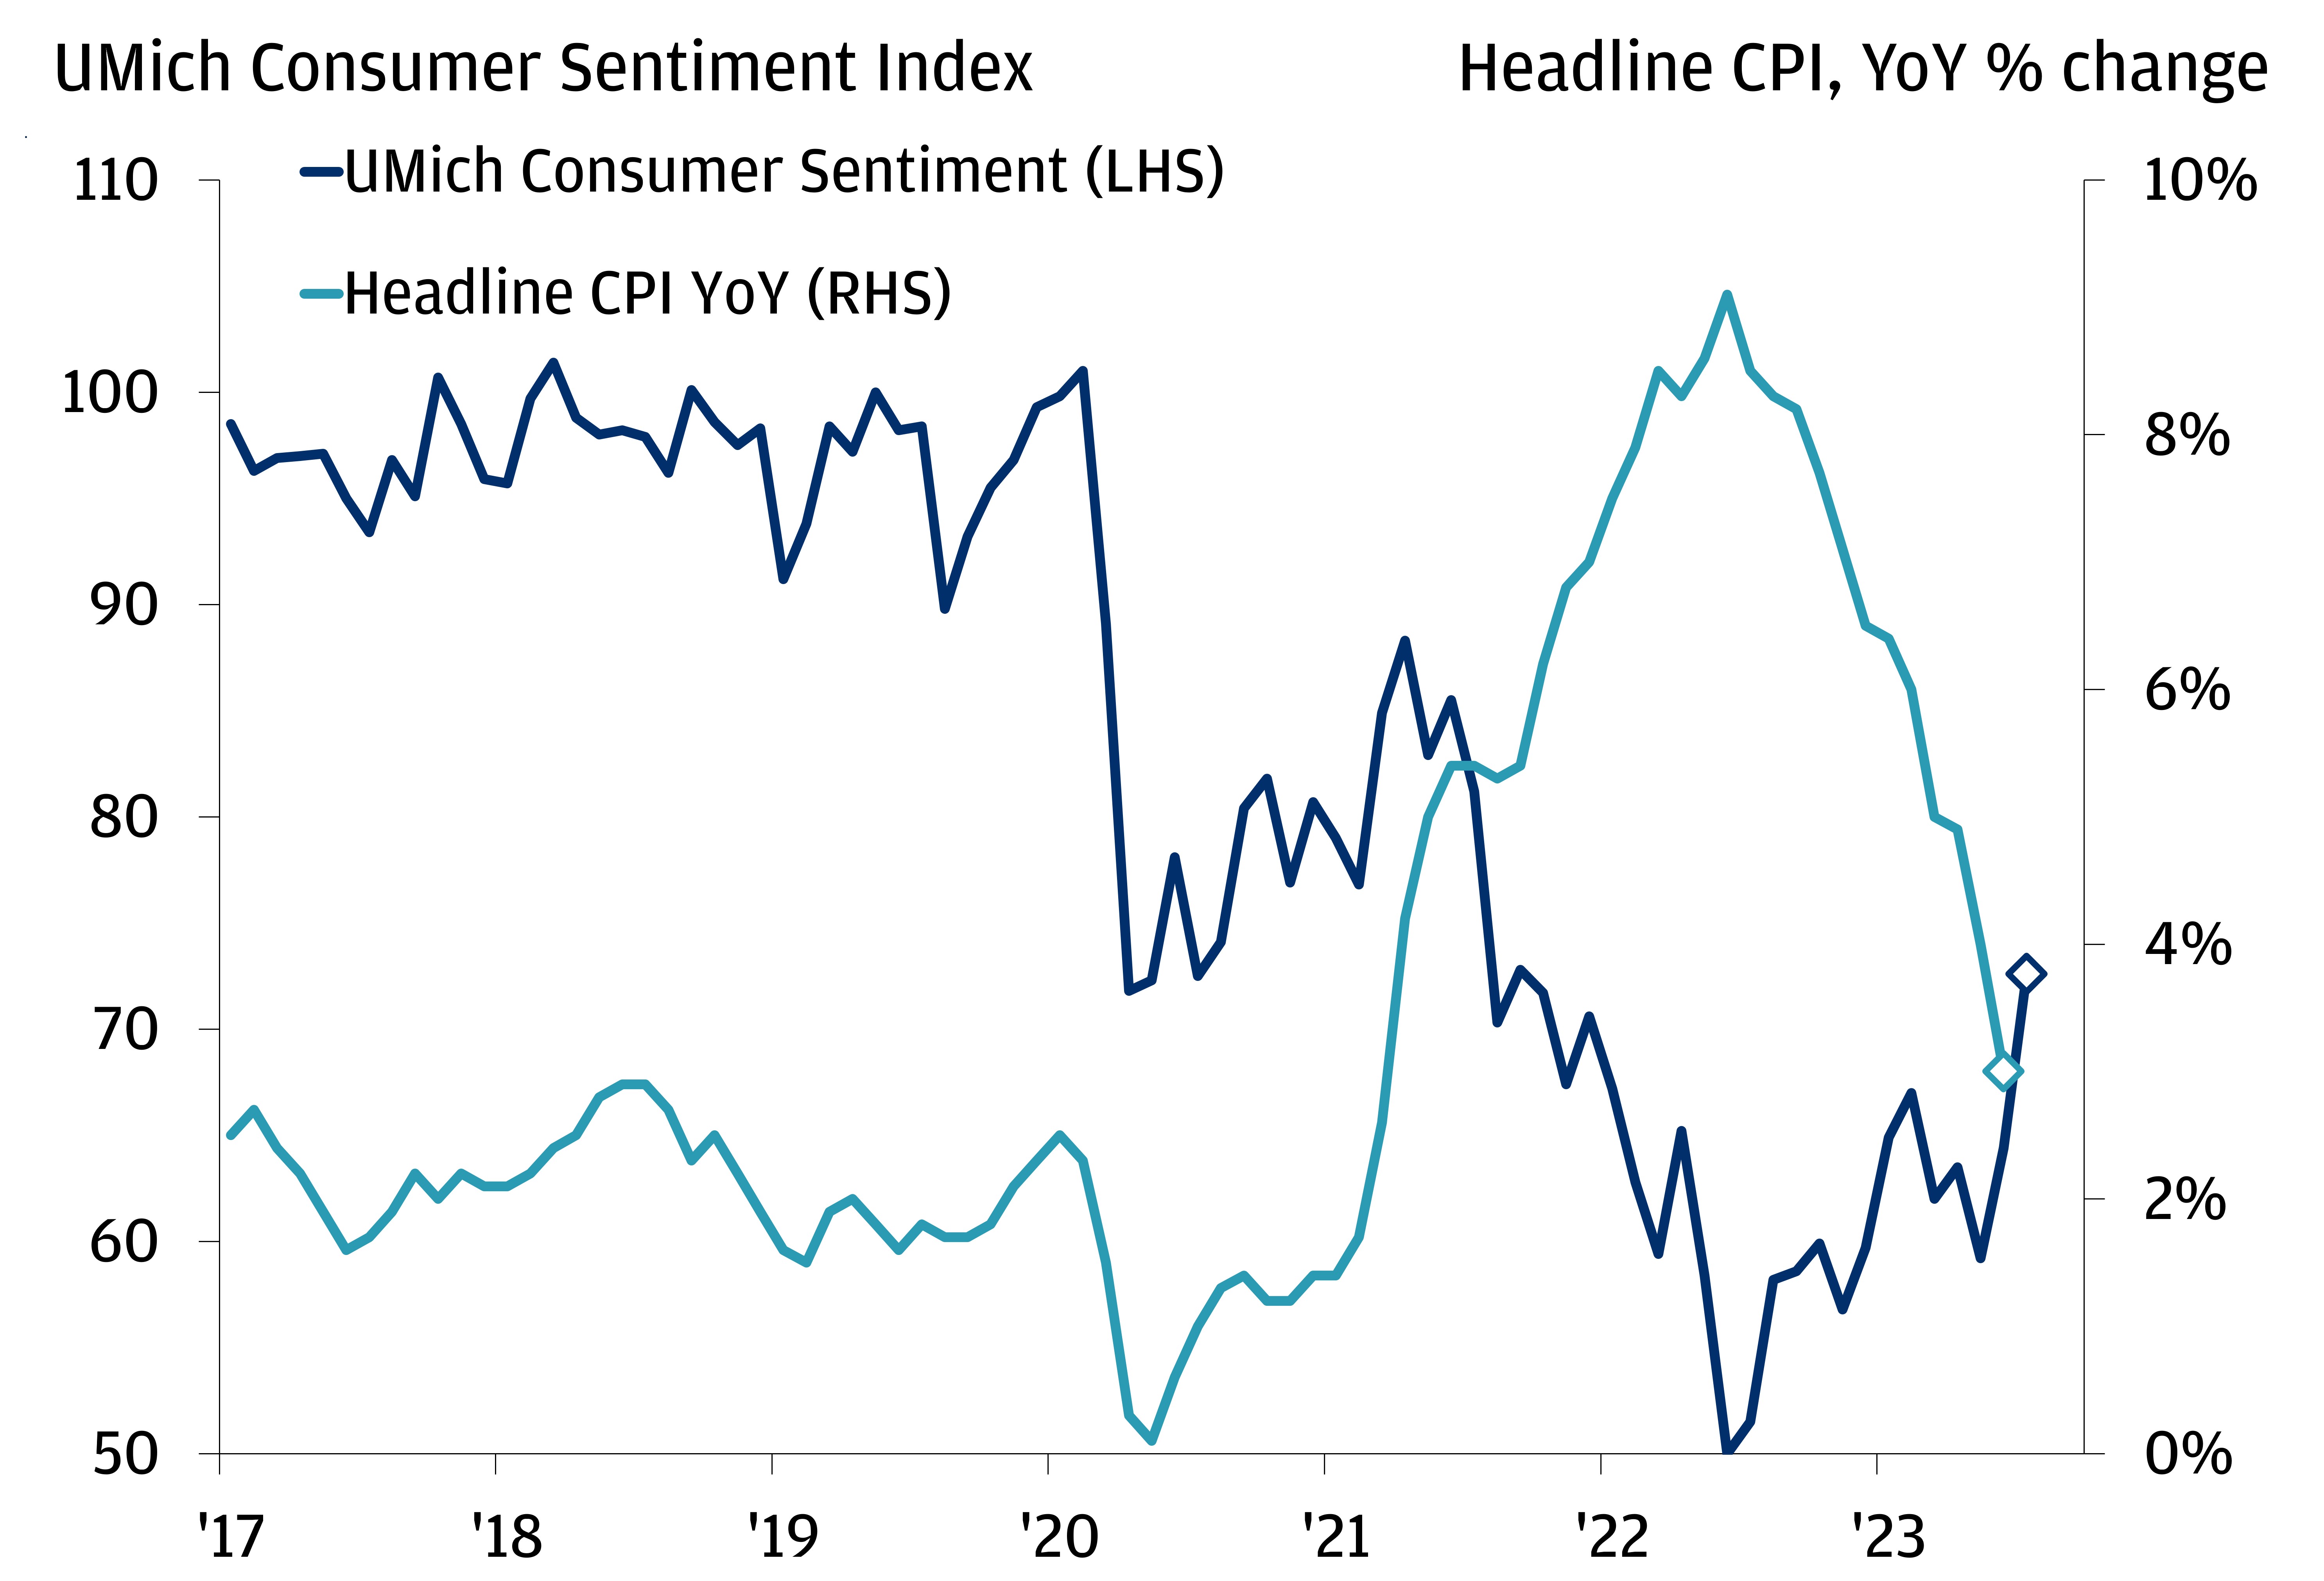 This chart describes consumer sentiment and inflation using the Umich Consumer Sentiment Index and the headline CPI, YoY% change data.